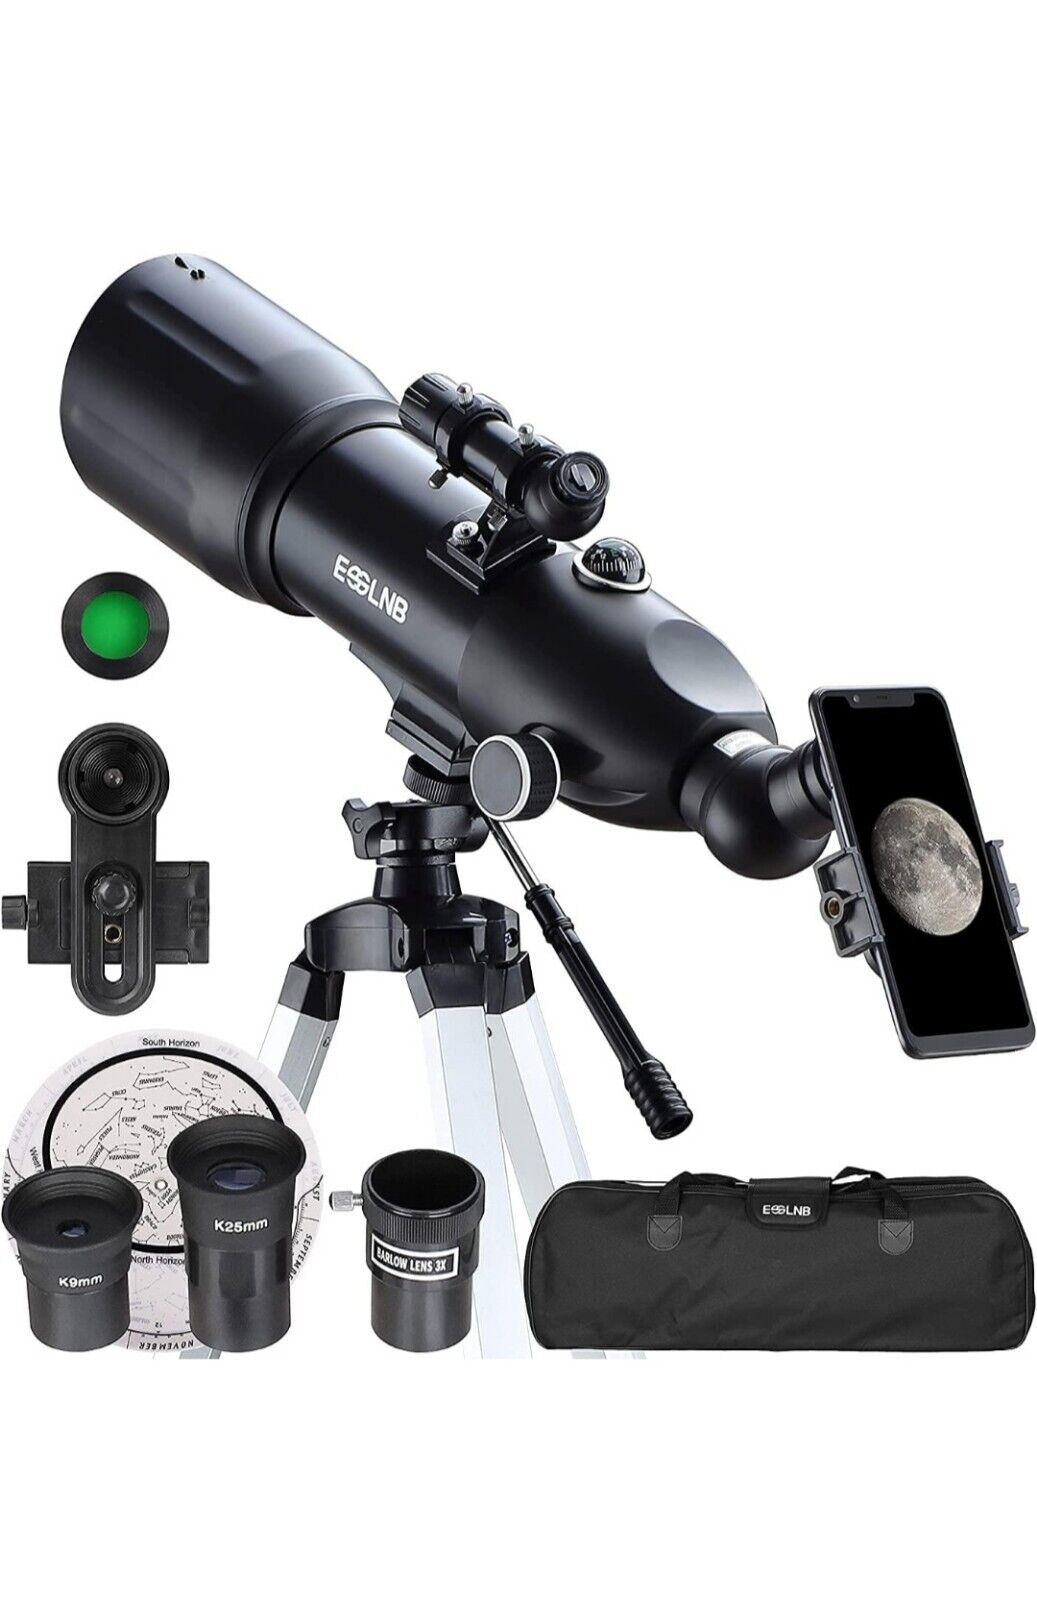  Telescopes for Adults & Kids Astronomy, 80mm Astronomical Travel 40080